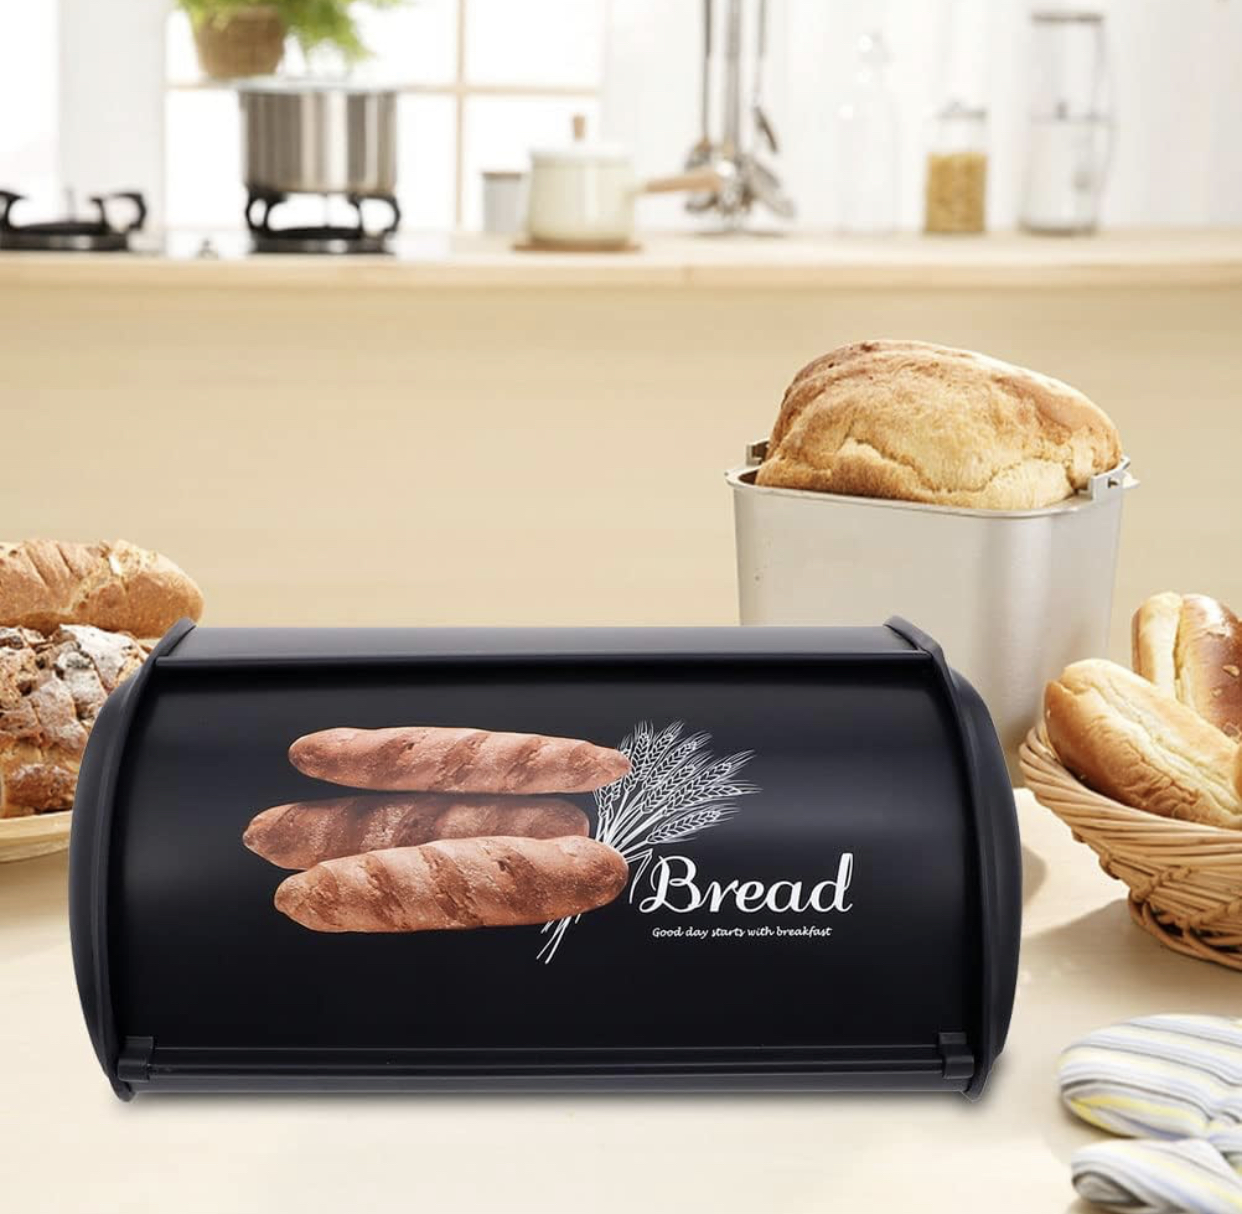 1pc Bread Box, Vintage Leak Proof Bread Bin With Lid, Reusable And Durable Bakery Bread Keeper, For Toast, Bread, Fruit And Vegetable, Kitchen Organizers And Storage, Kitchen Accessories